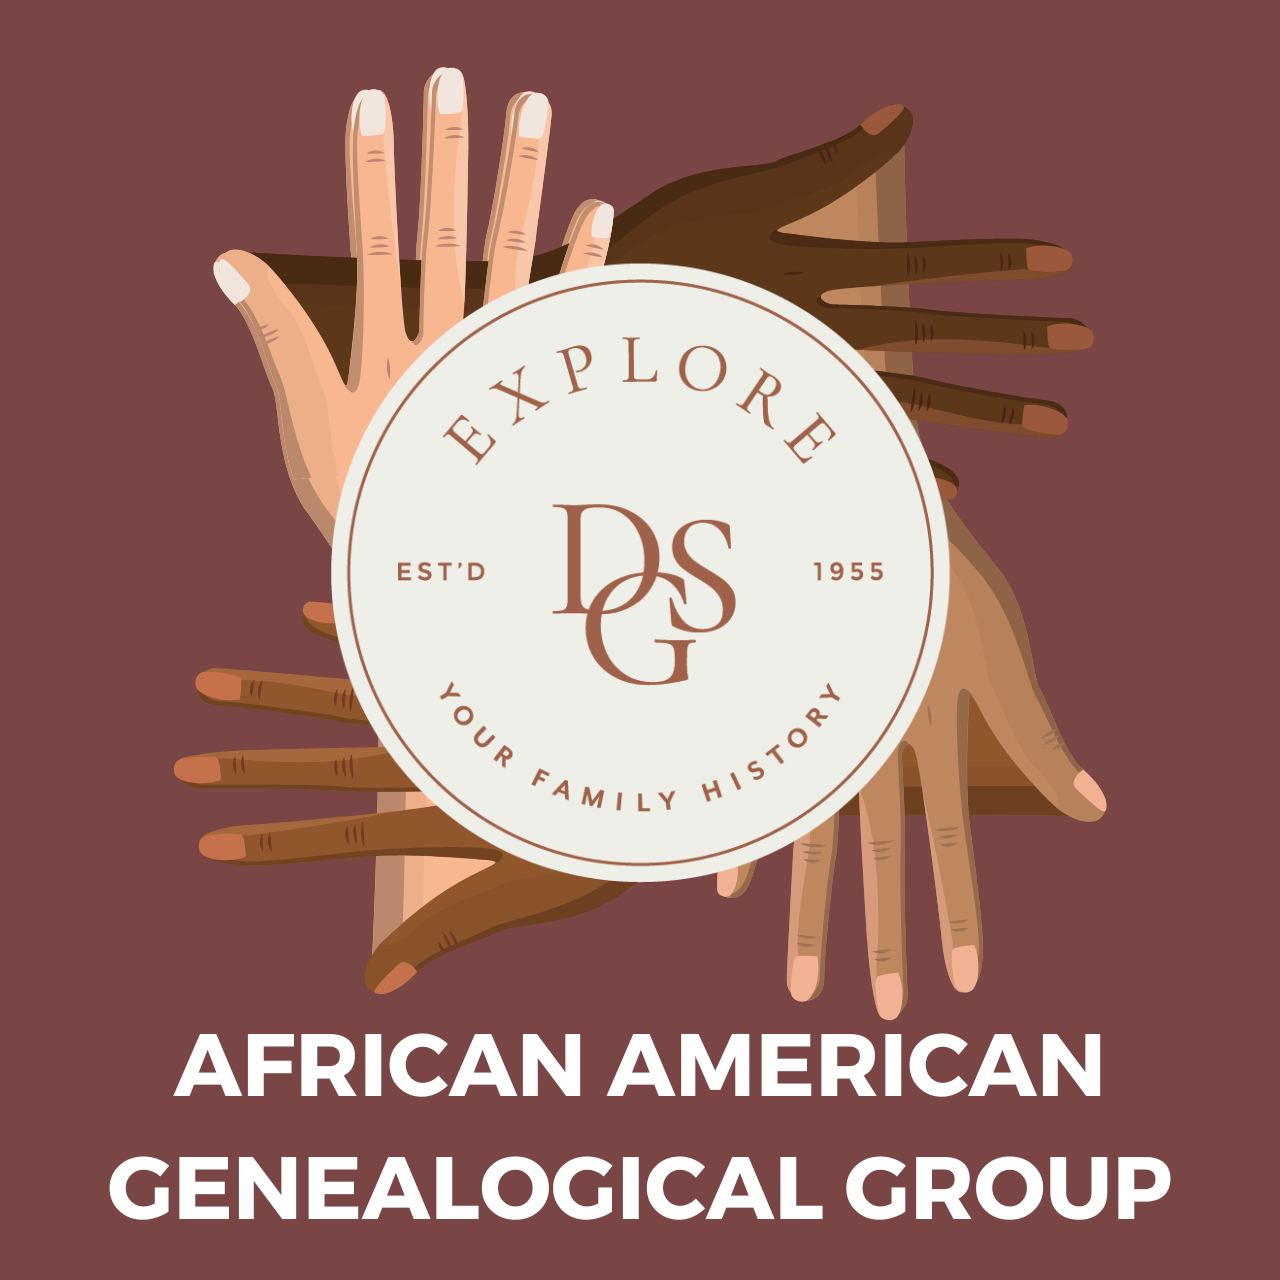 DGS logo over four flat palm hands on a maroon background